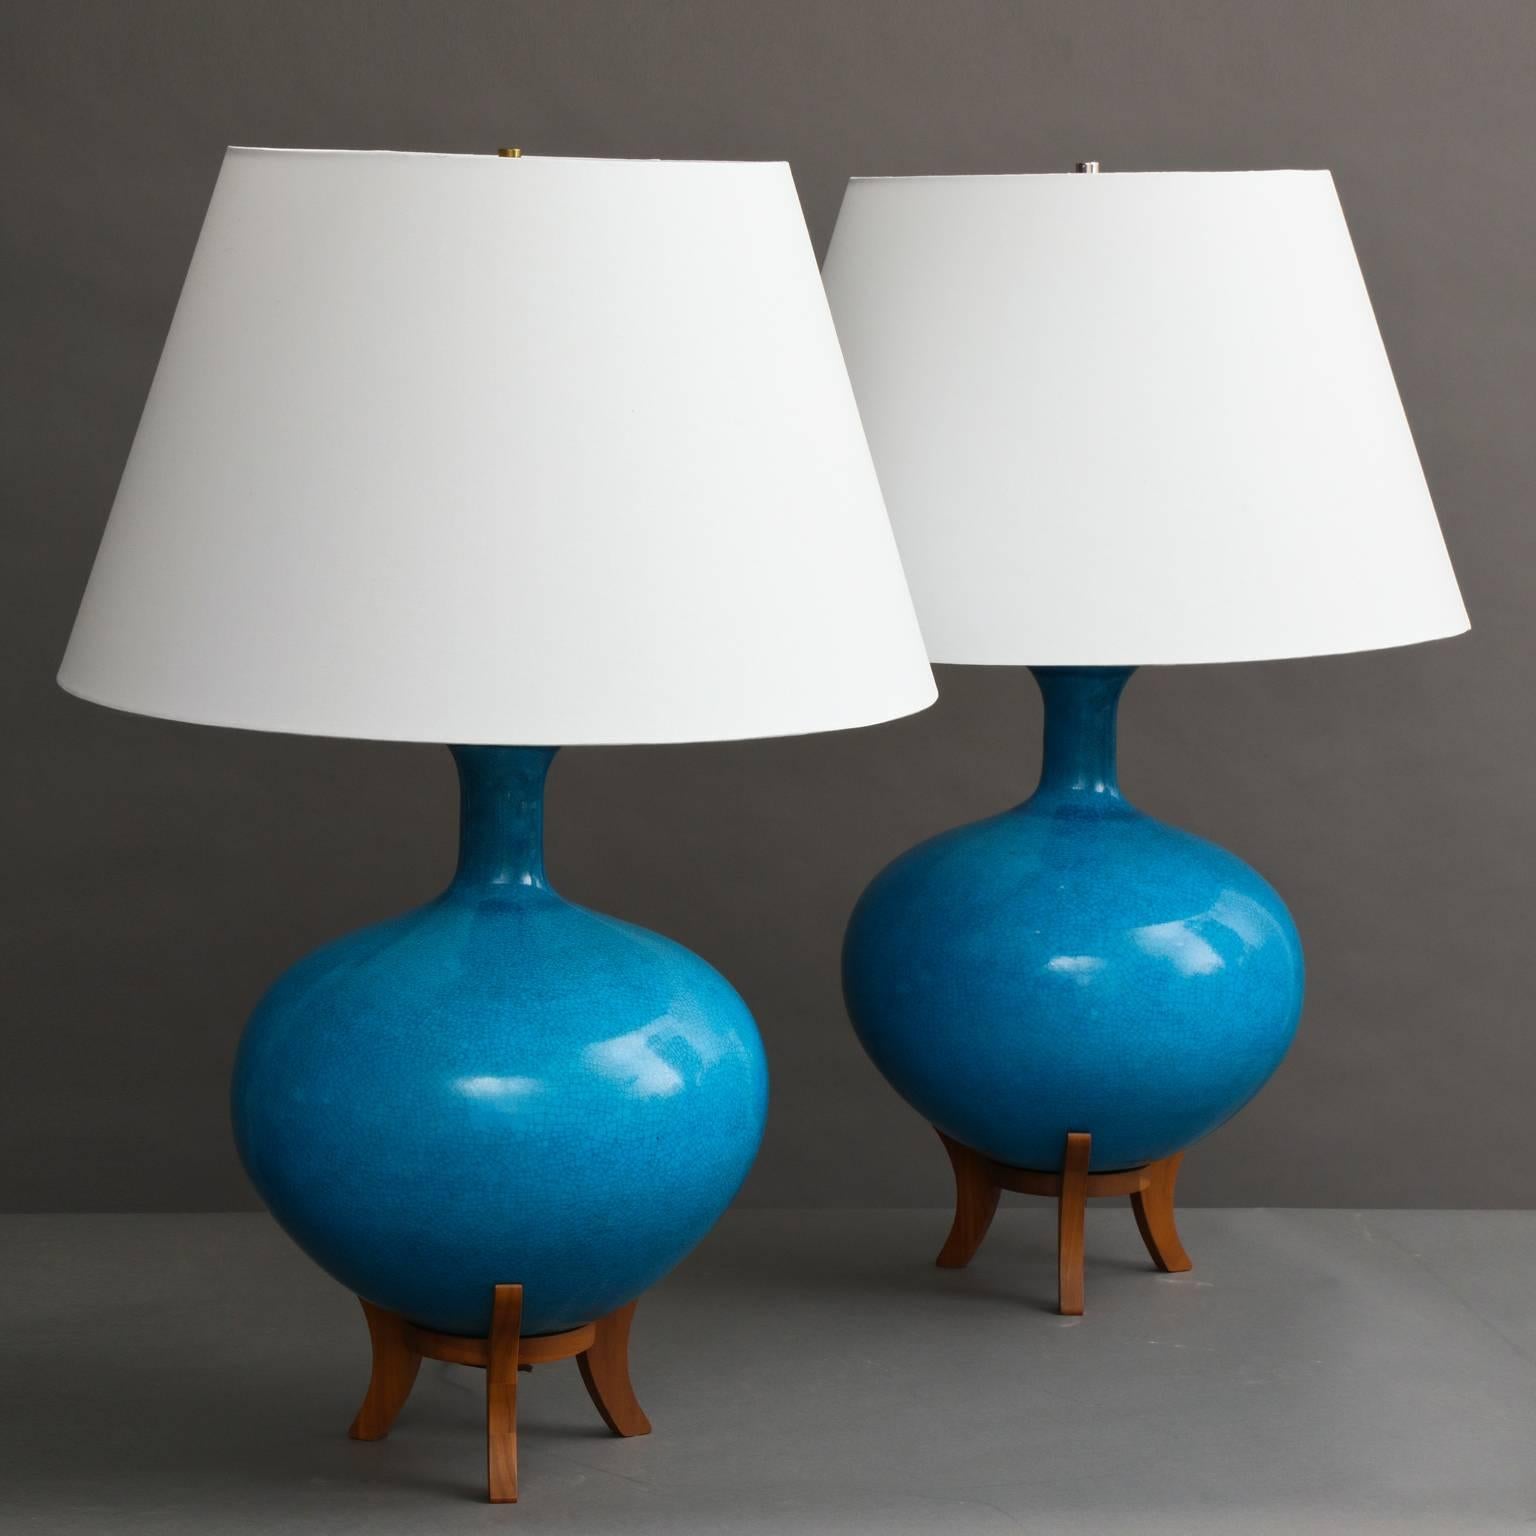 Pair of large ceramic lamps in a crackled rich turquoise blue glaze mounted on teak wood bases with curved feet. Lampshades not included.
American, circa 1950.
Measures: 22.5